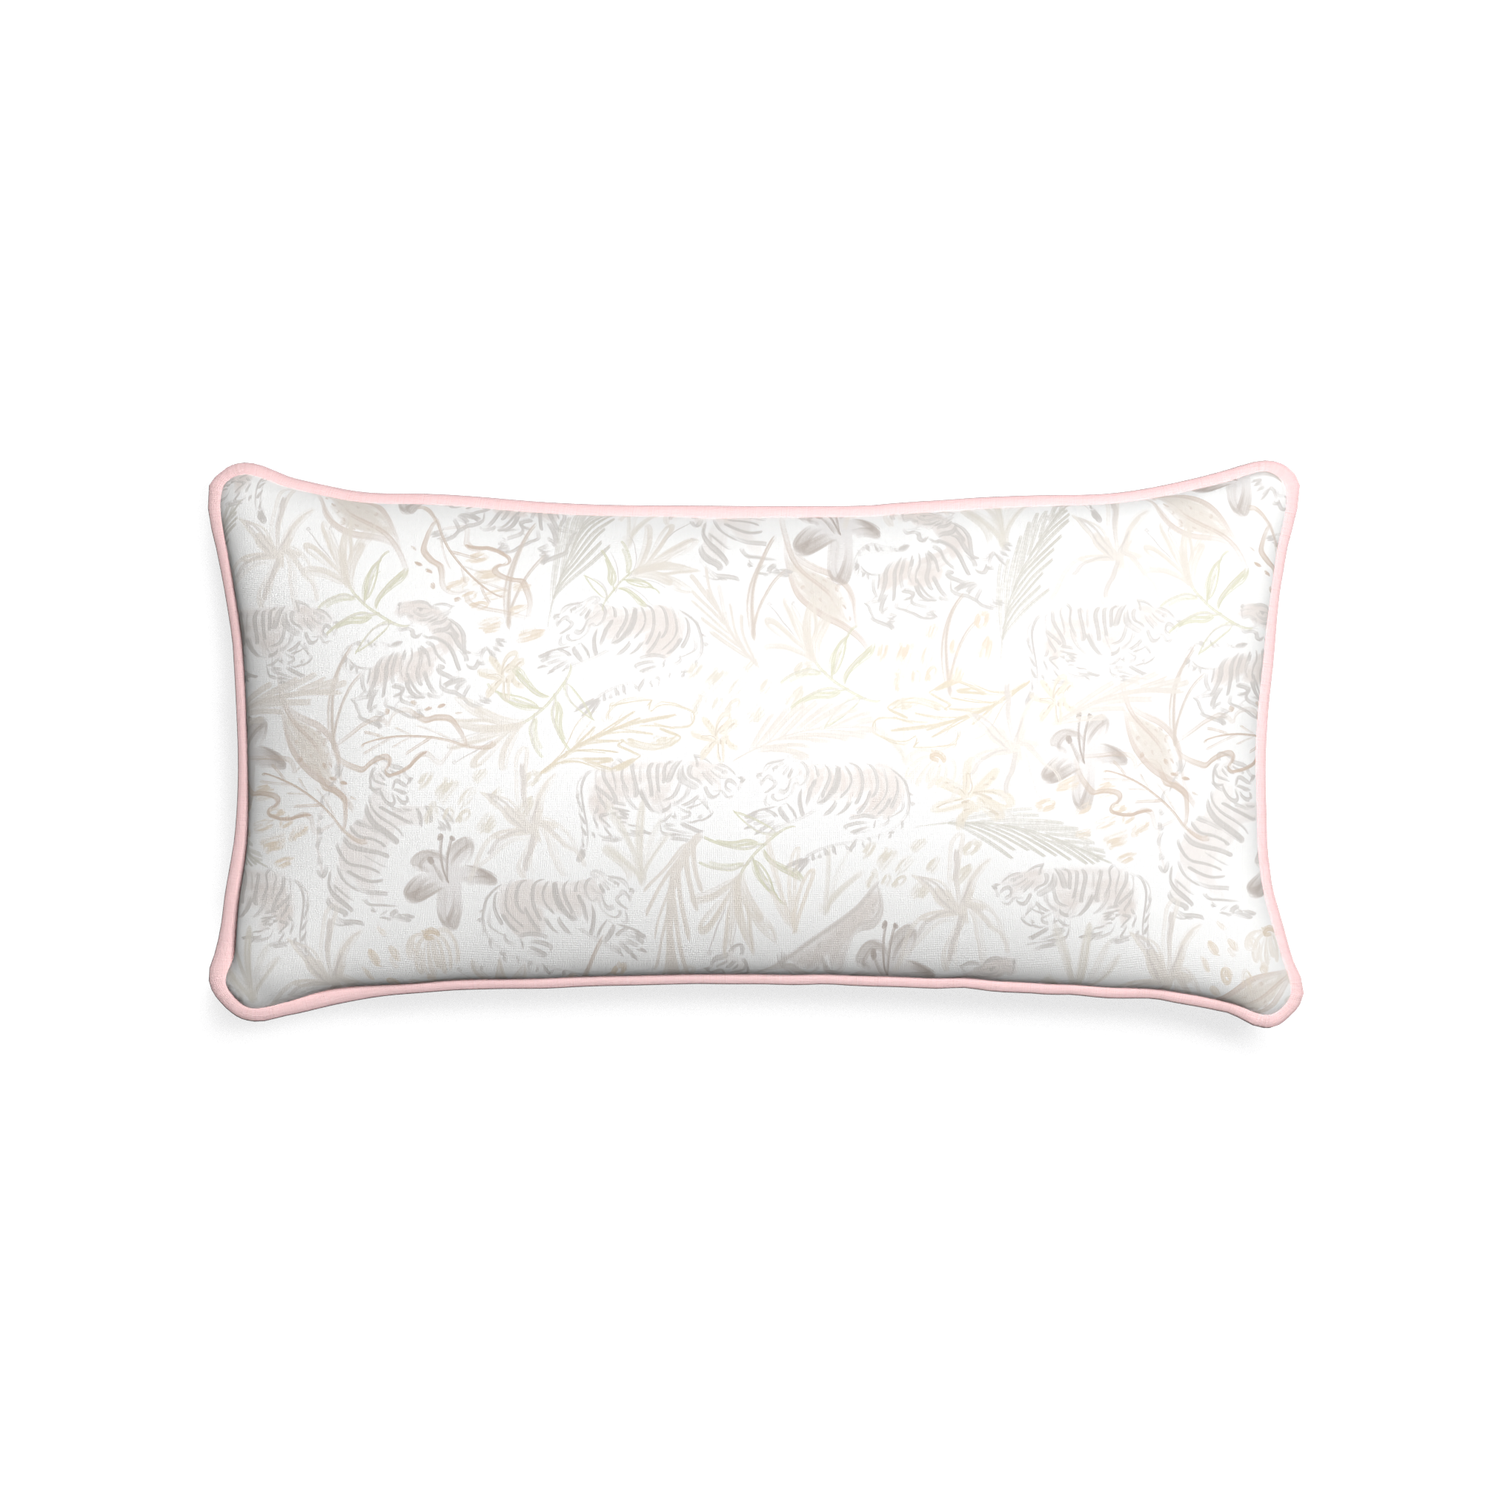 Midi-lumbar frida sand custom beige chinoiserie tigerpillow with petal piping on white background